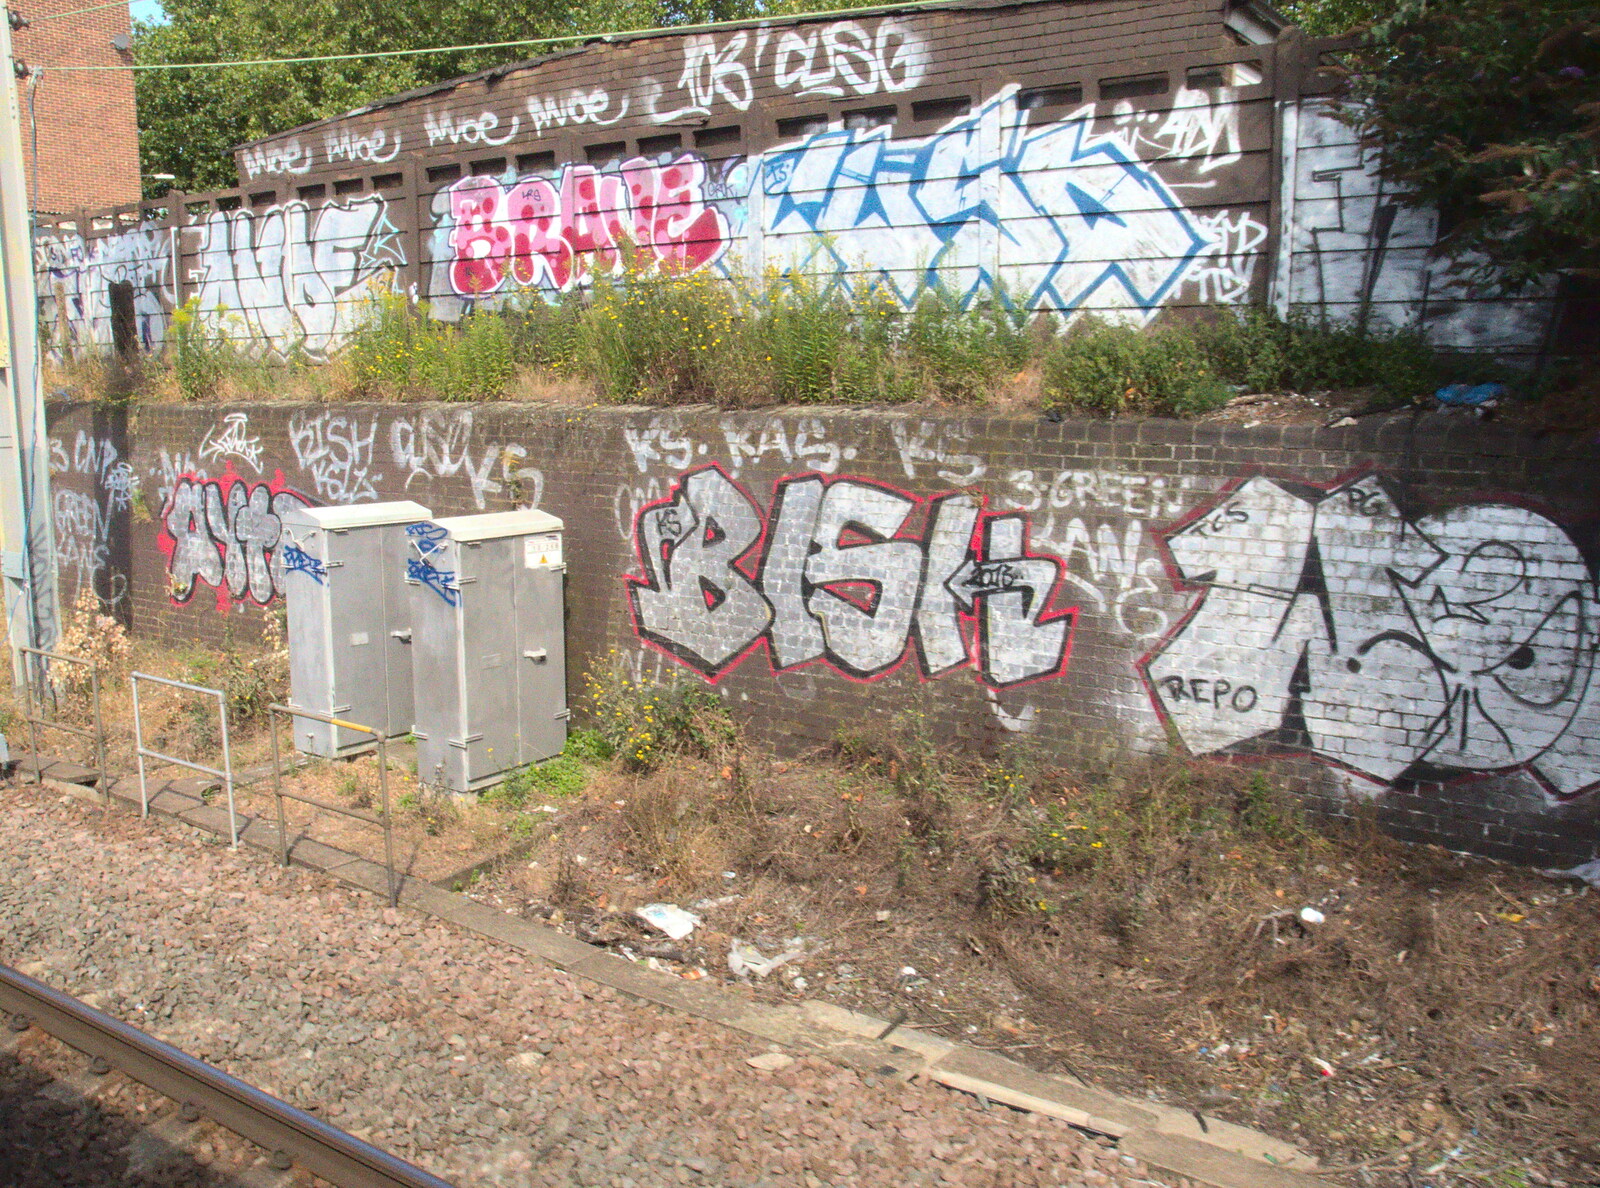 A cluster of graffiti on a couple of walls from A Week on the Rails, Stratford and Liverpool Street, London - 23rd July